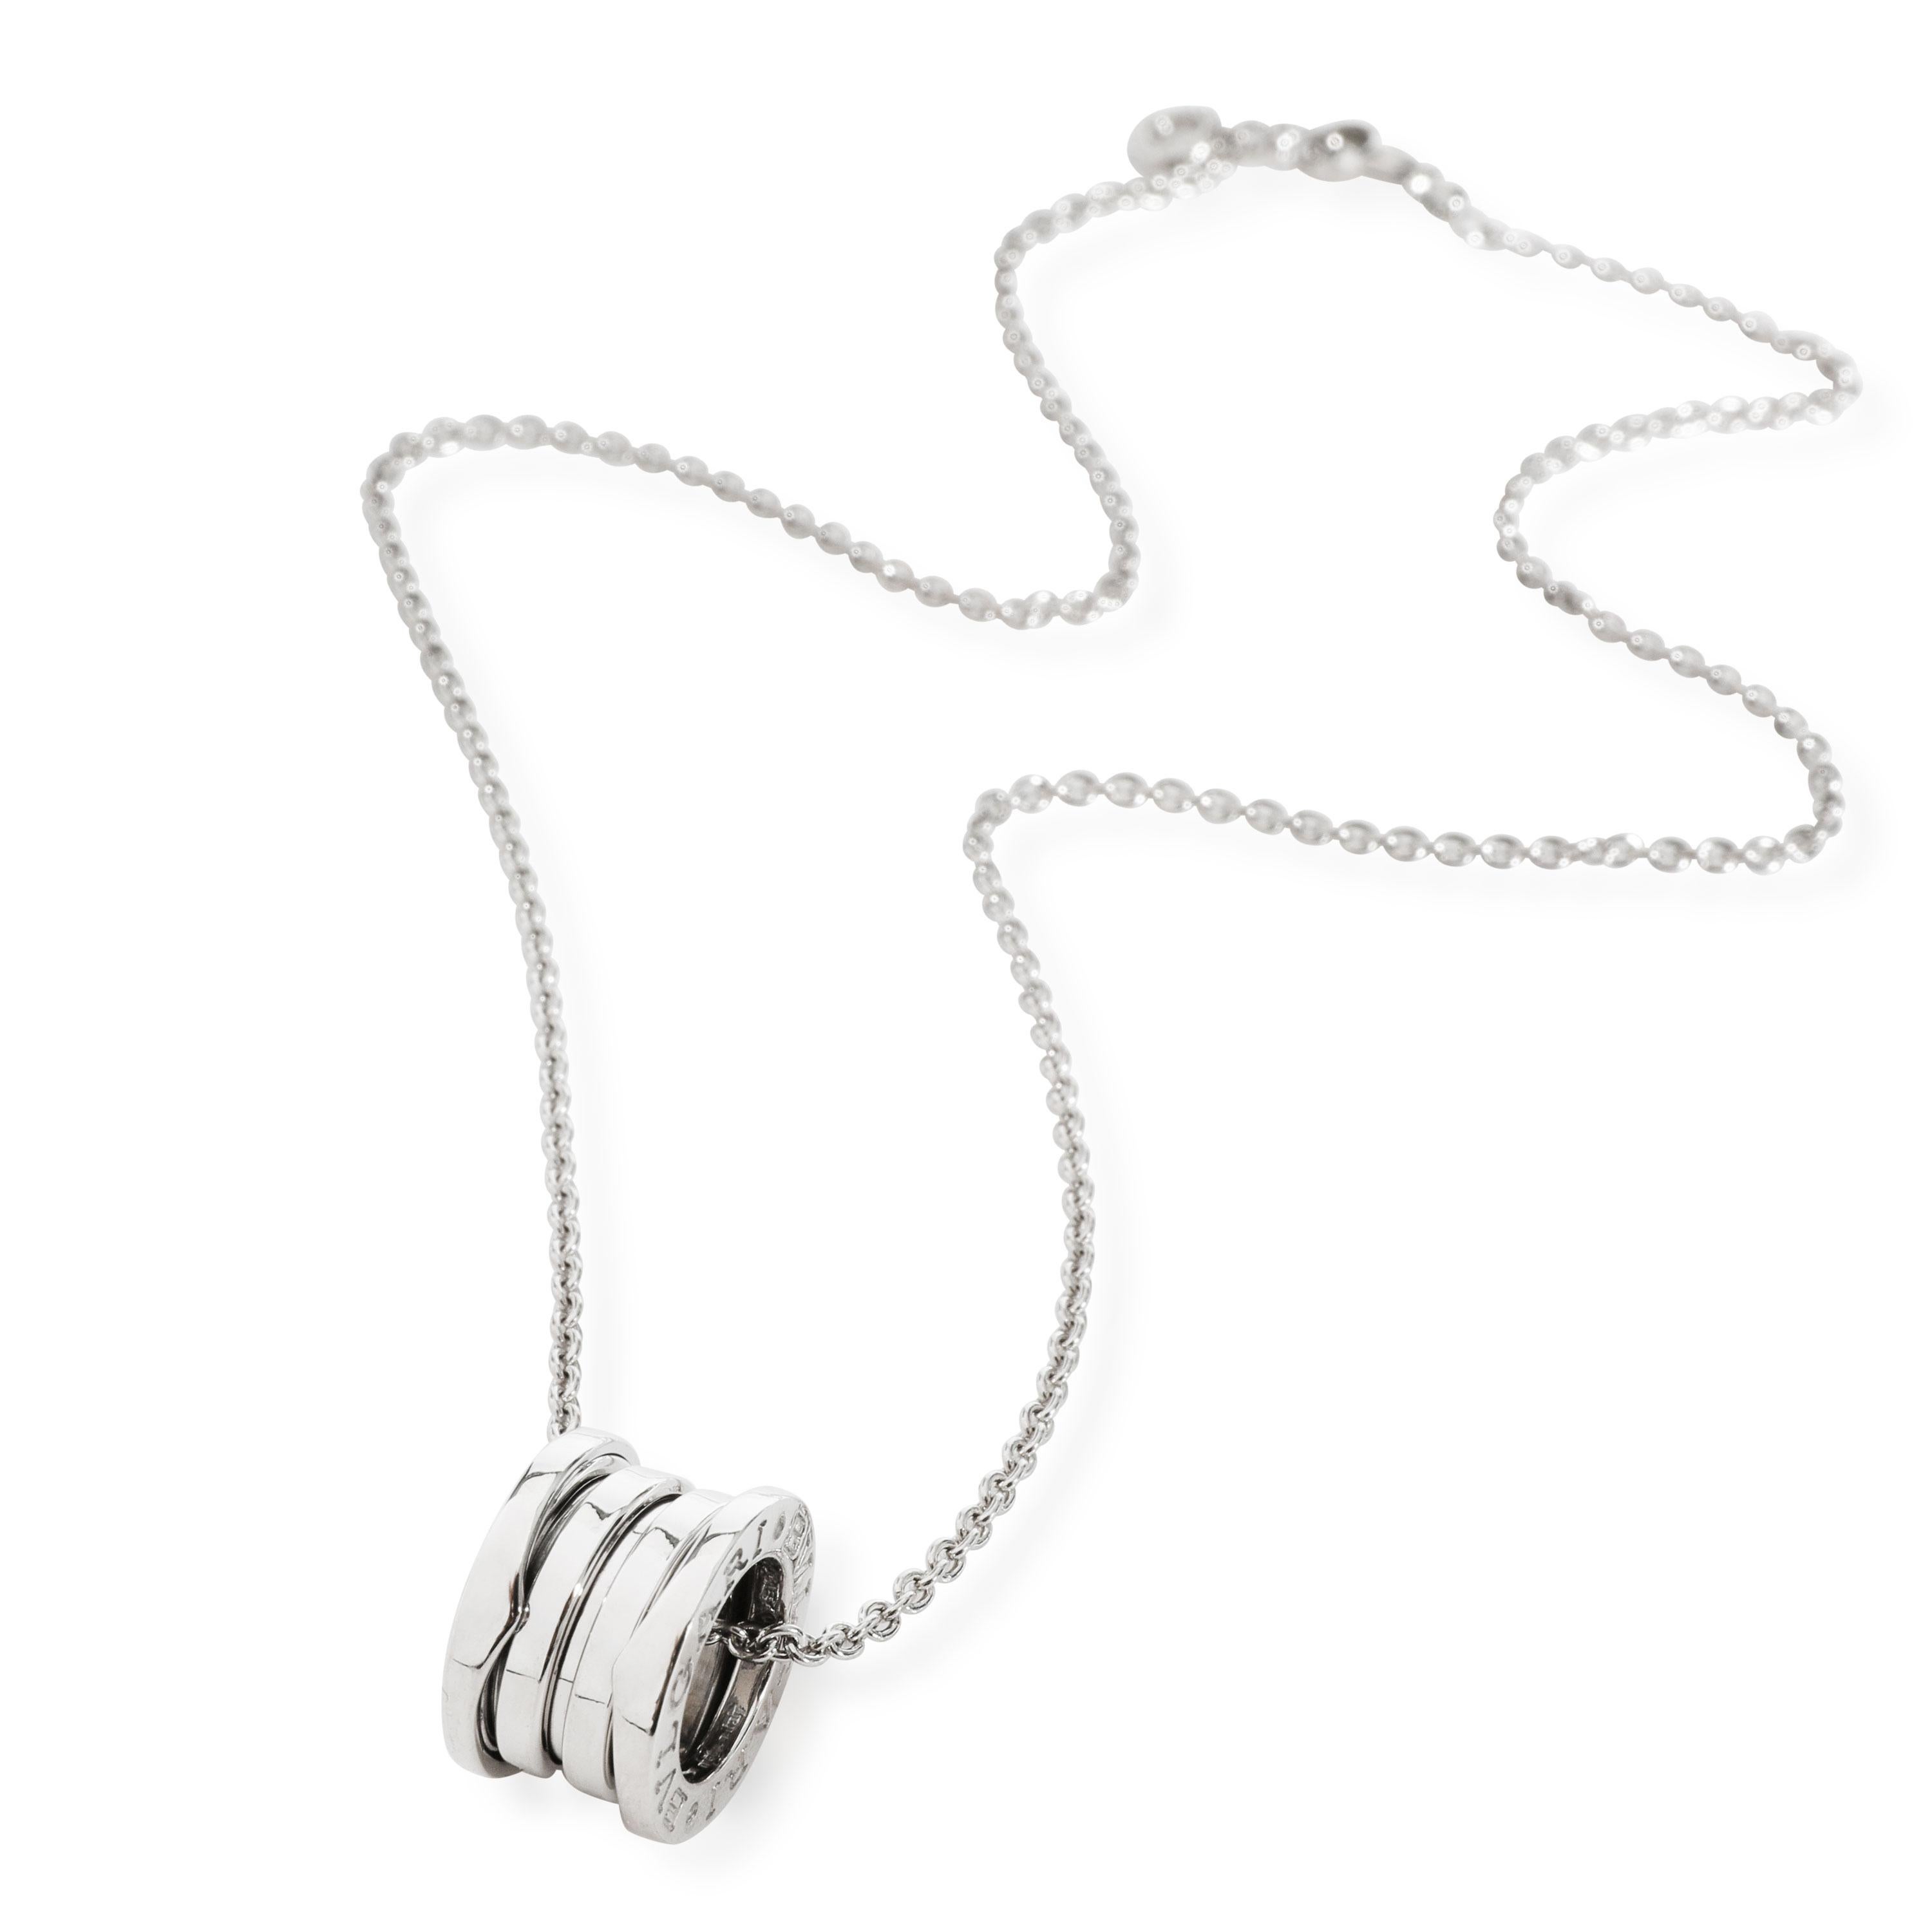 BVLGARI B Zero 1 Pendant in 18K White Gold

PRIMARY DETAILS
SKU: 112539
Listing Title: BVLGARI B Zero 1 Pendant in 18K White Gold
Condition Description: Retails for 3600 USD. In excellent condition and recently polished. Chain is 16 inches in